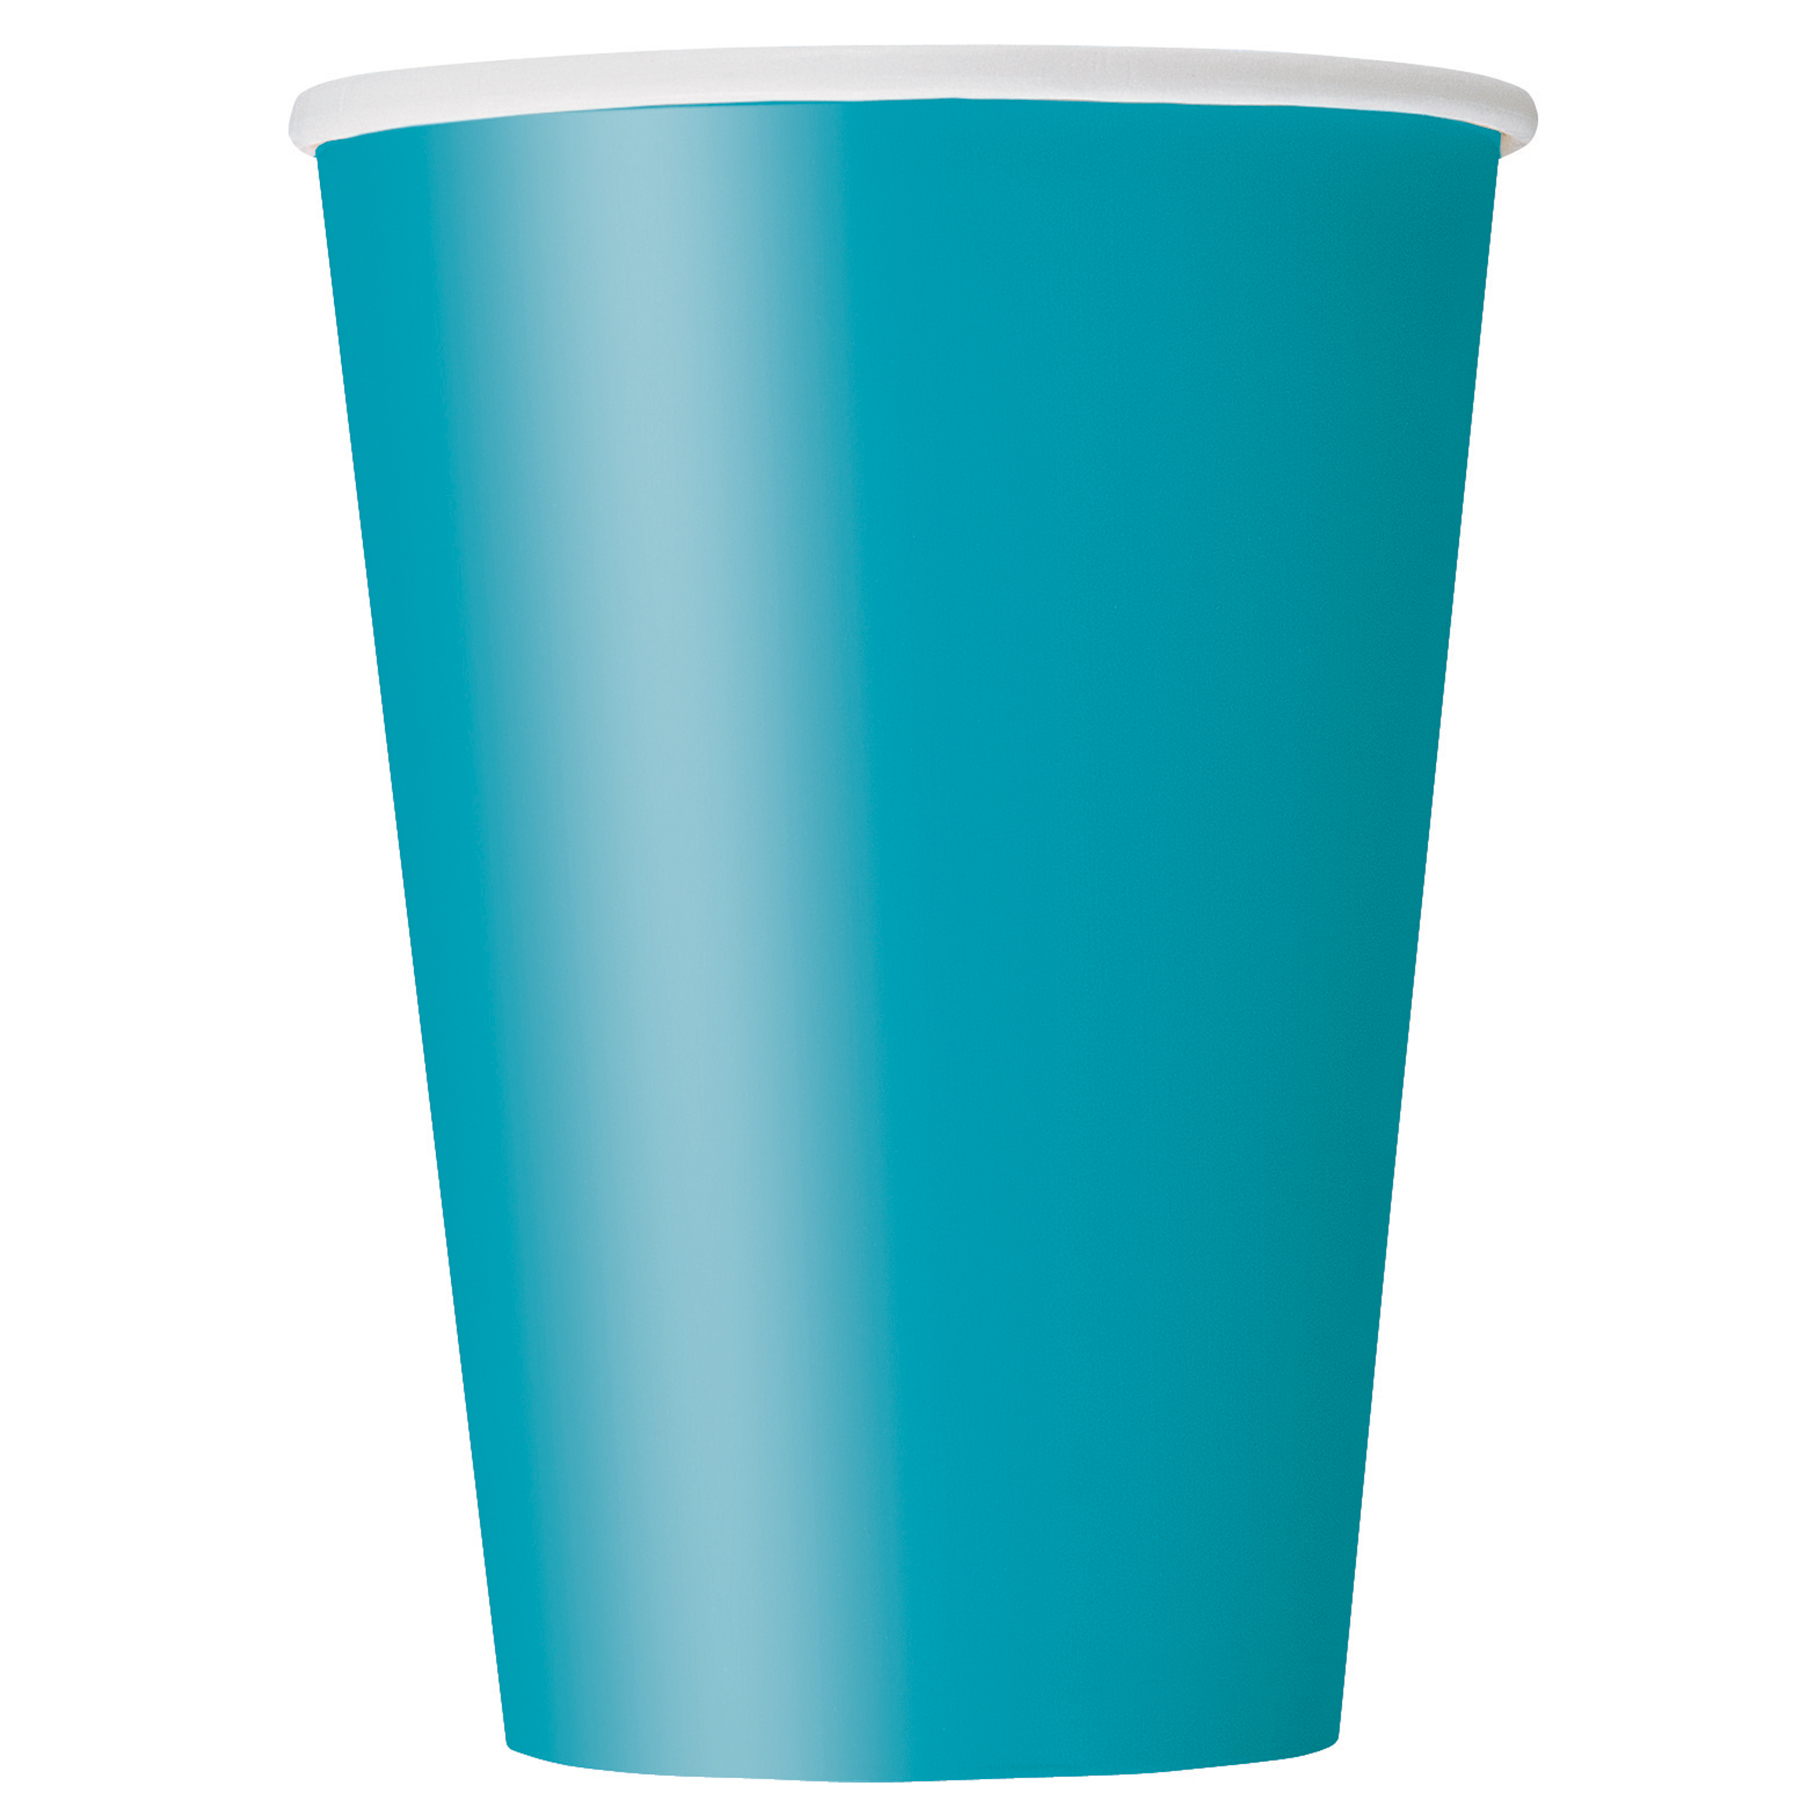 Paper Cups, 9 oz, Teal, 14ct - image 1 of 4